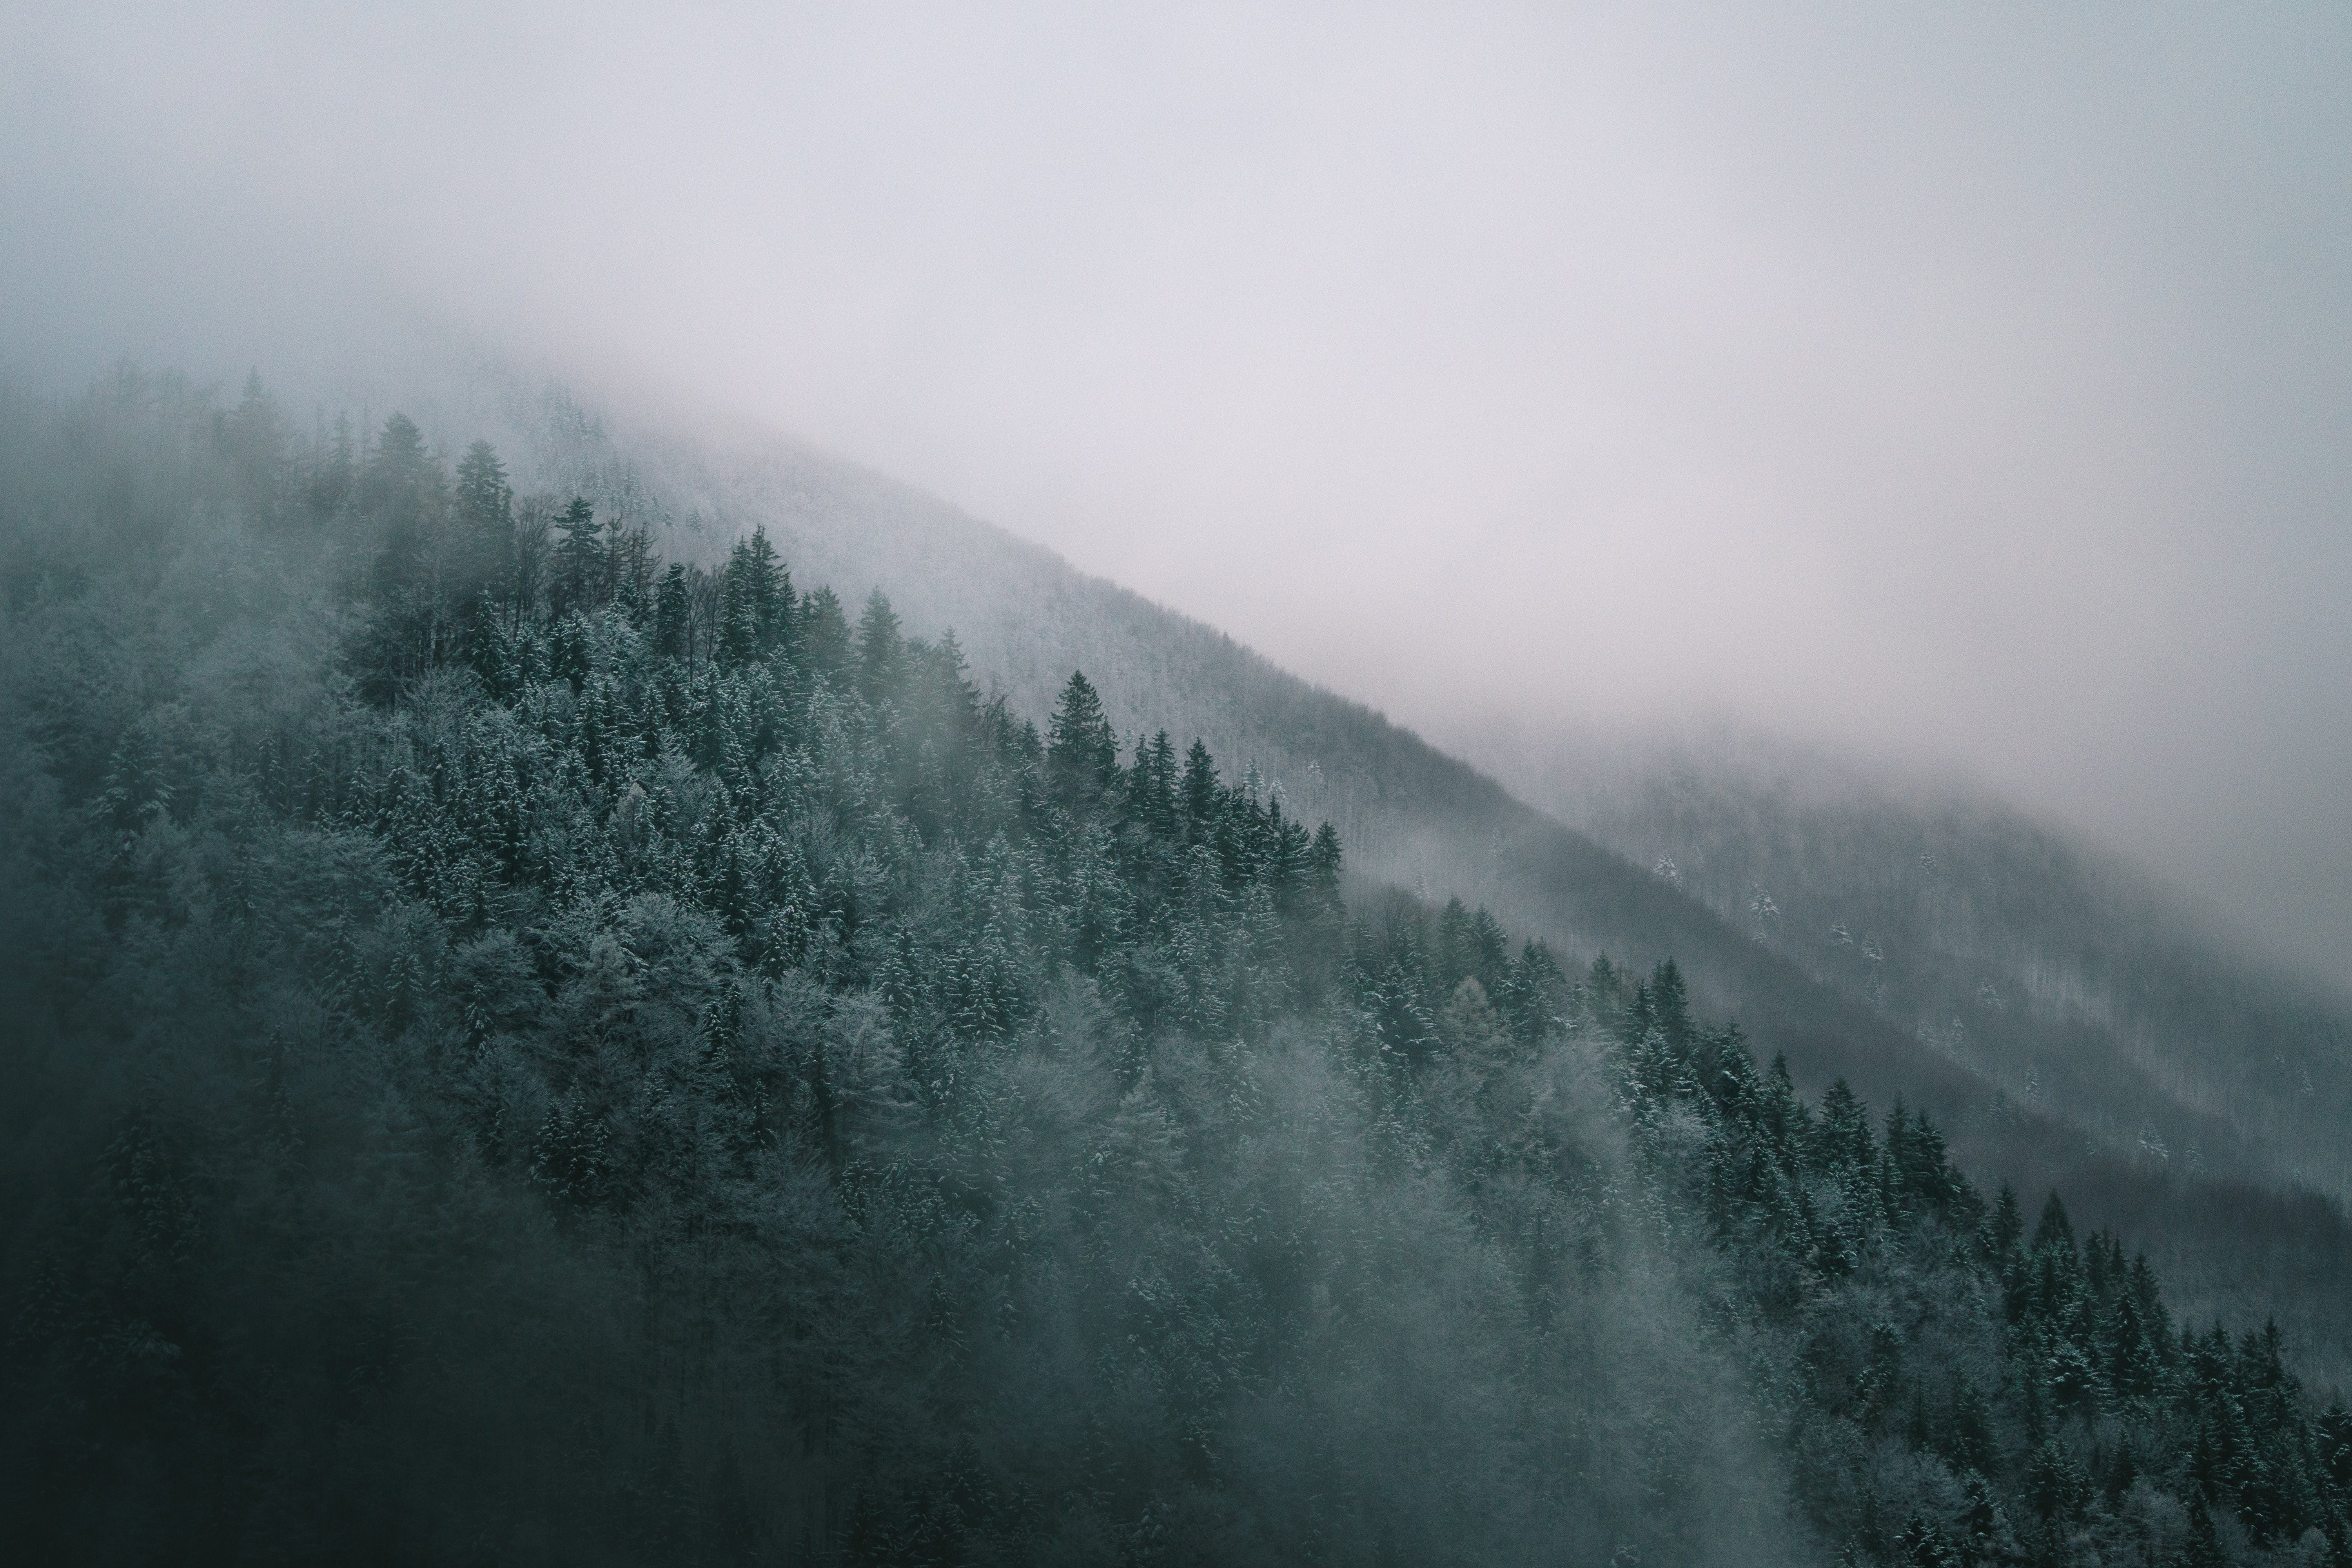 6000x4000 rainy, wallpaper, mountain, outdoors, moody, malá fatra, snow, winter, Public domain image, forest, mist, fog, tree, weather, abies, foggy, fir, nature, plant, mountains, conifer